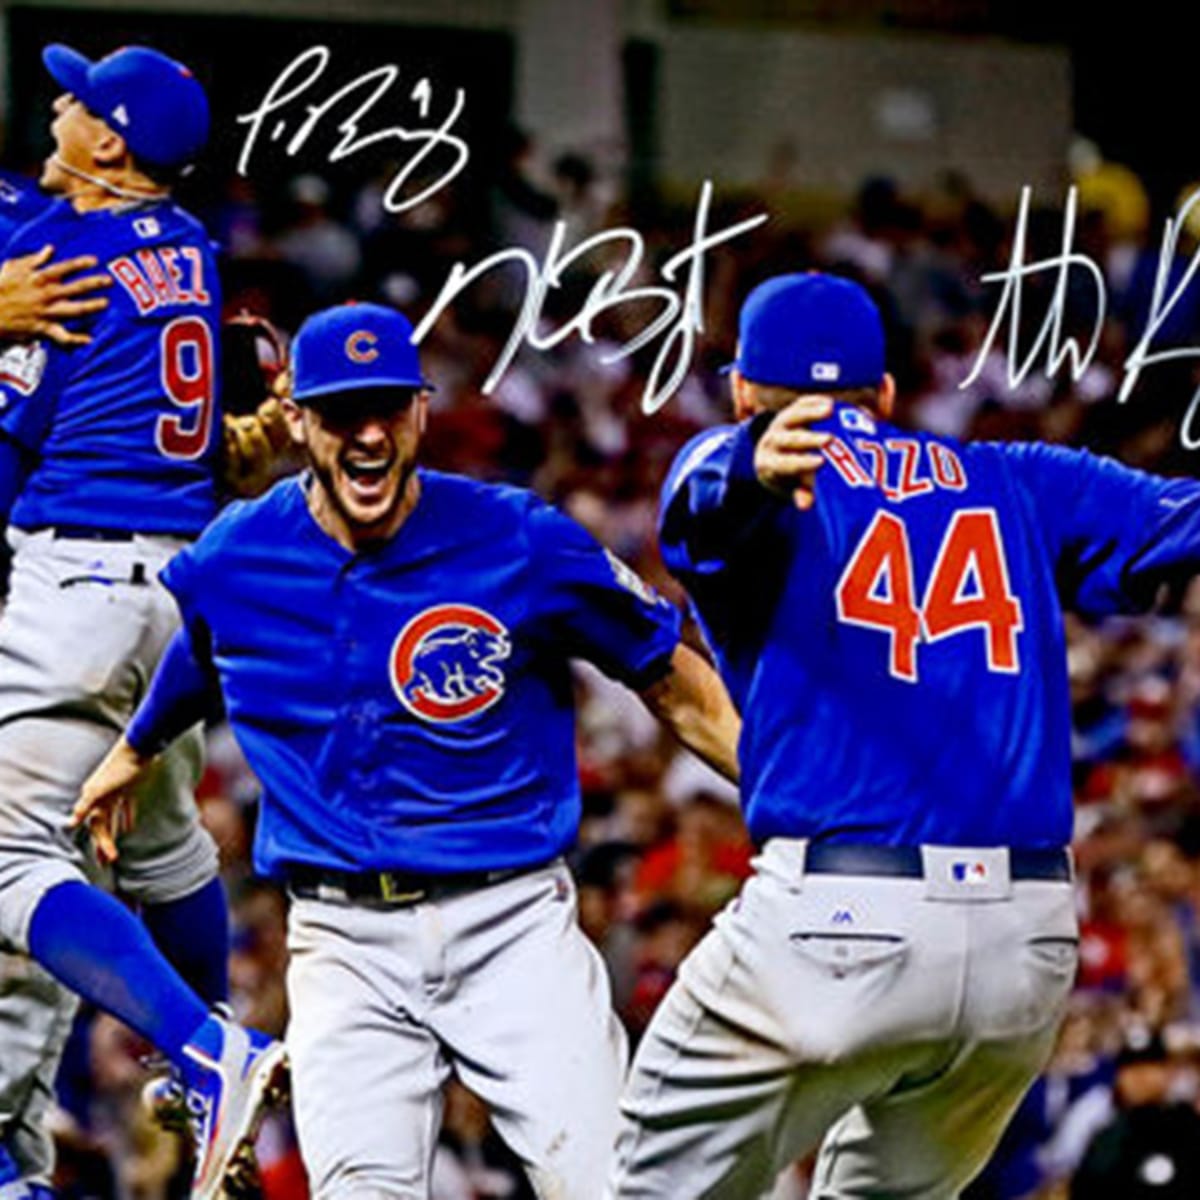 Chicago Cubs World Series Autographed Celebration photo - Sports